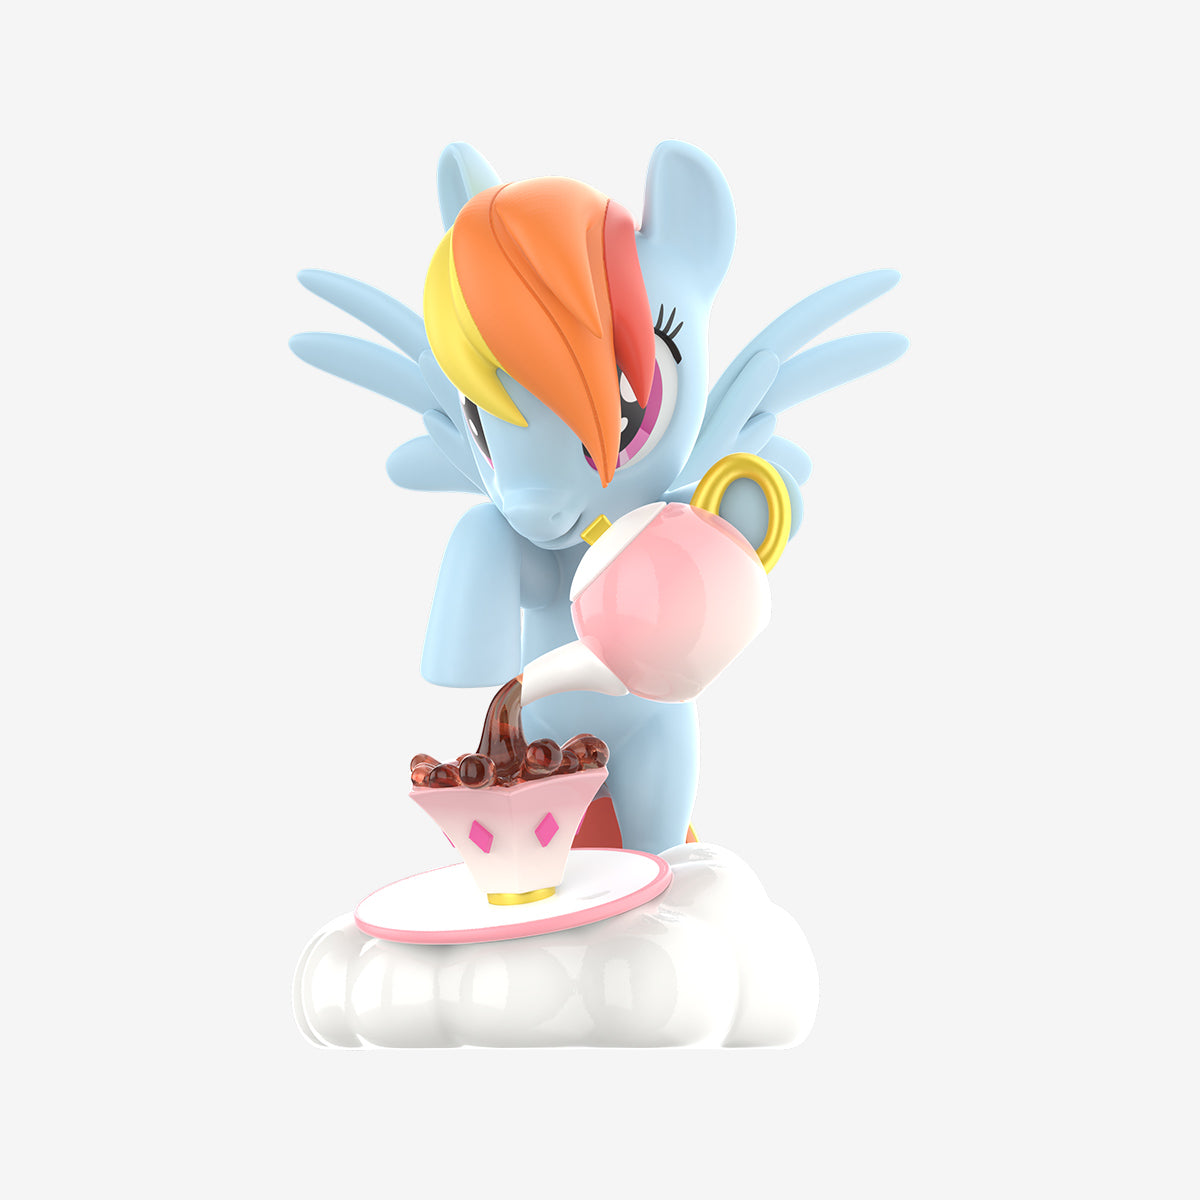 【Restock】My Little Pony Leisure Afternoon Series Blind Box